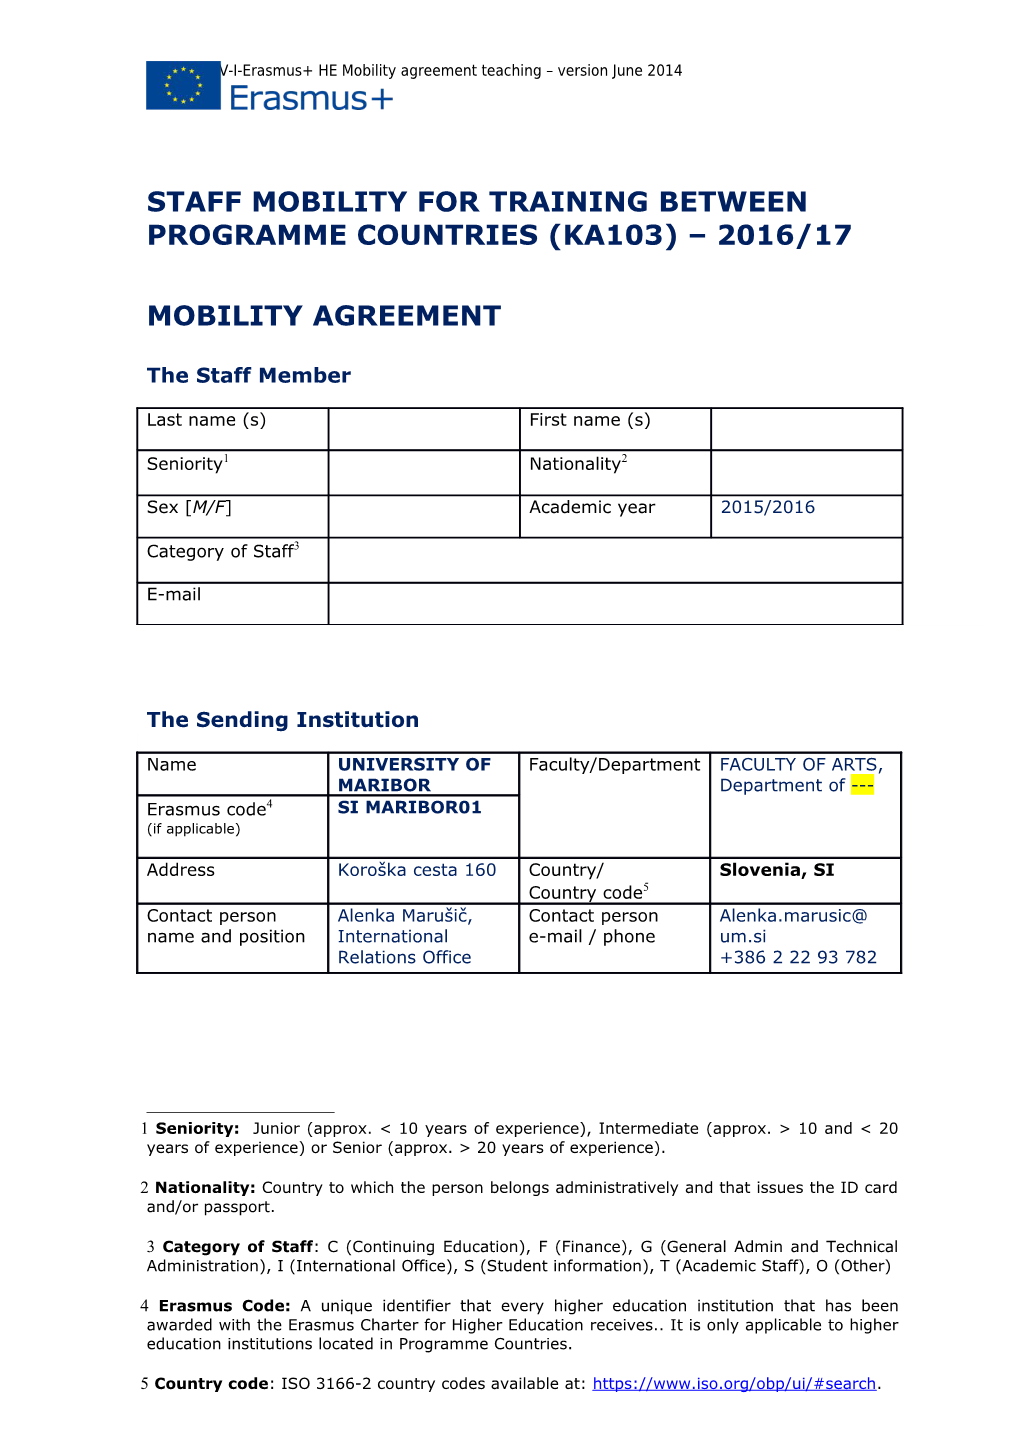 Staff Mobility for Training Between Programme Countries (Ka103) 2016/17